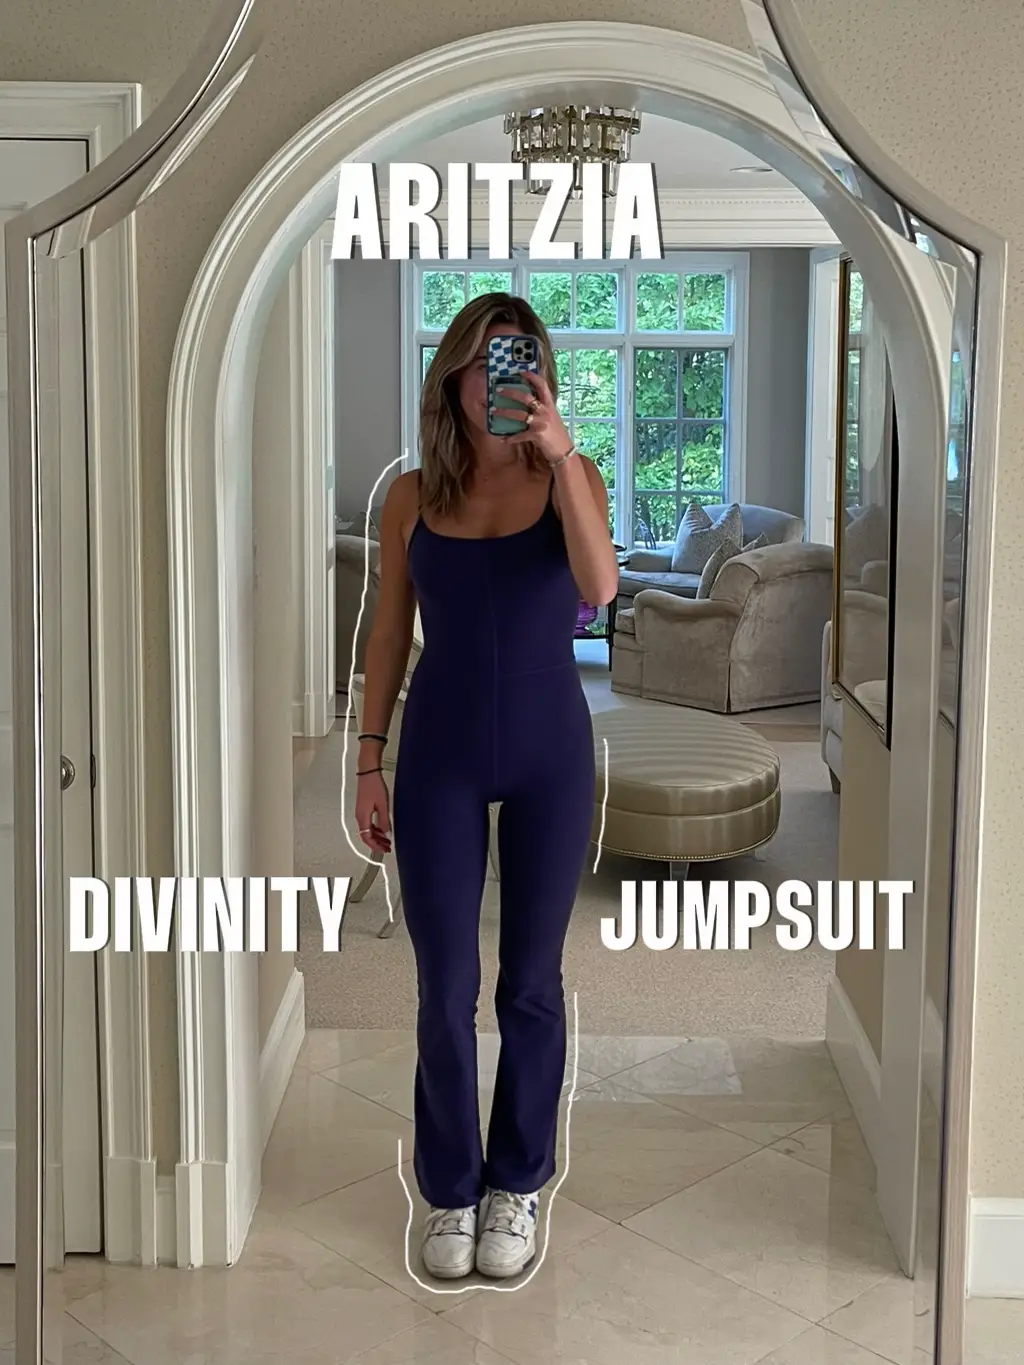 The Divinity Jumpsuit hype is worth it : r/Aritzia